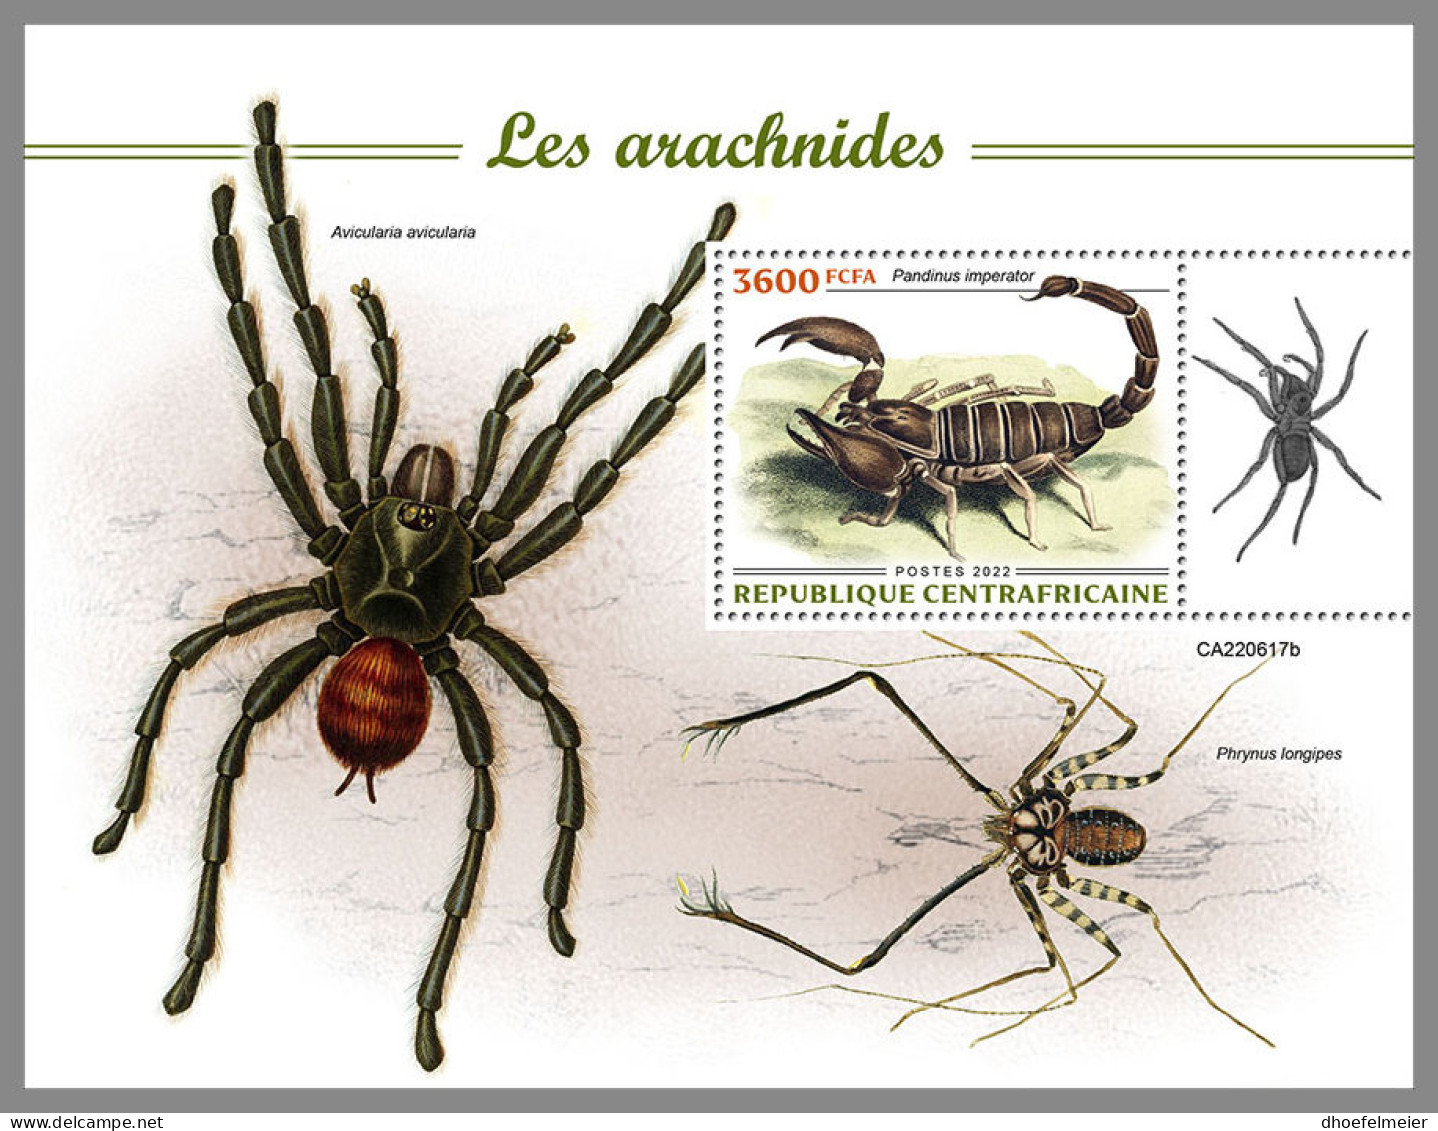 CENTRAL AFRICAN REP. 2022 MNH Arachnids Spinnentiere Arachnides S/S - OFFICIAL ISSUE - DHQ2314 - Spiders